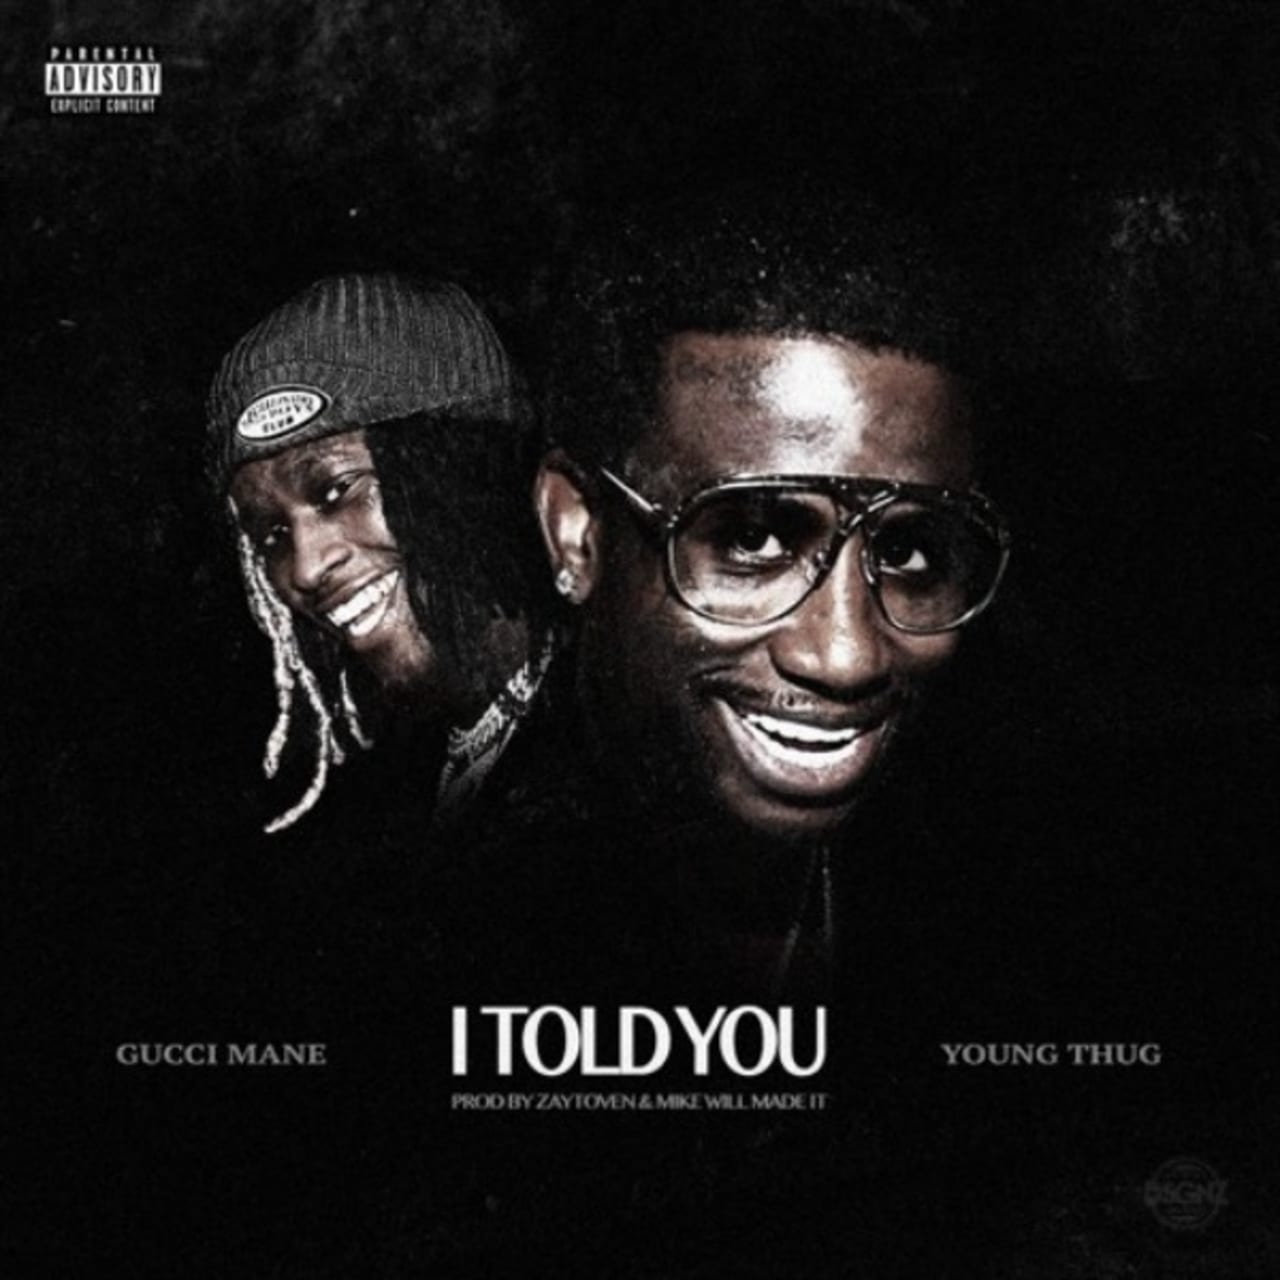 Gucci Mane and Young Thug Rep Atlanta on “I Told You” | Complex